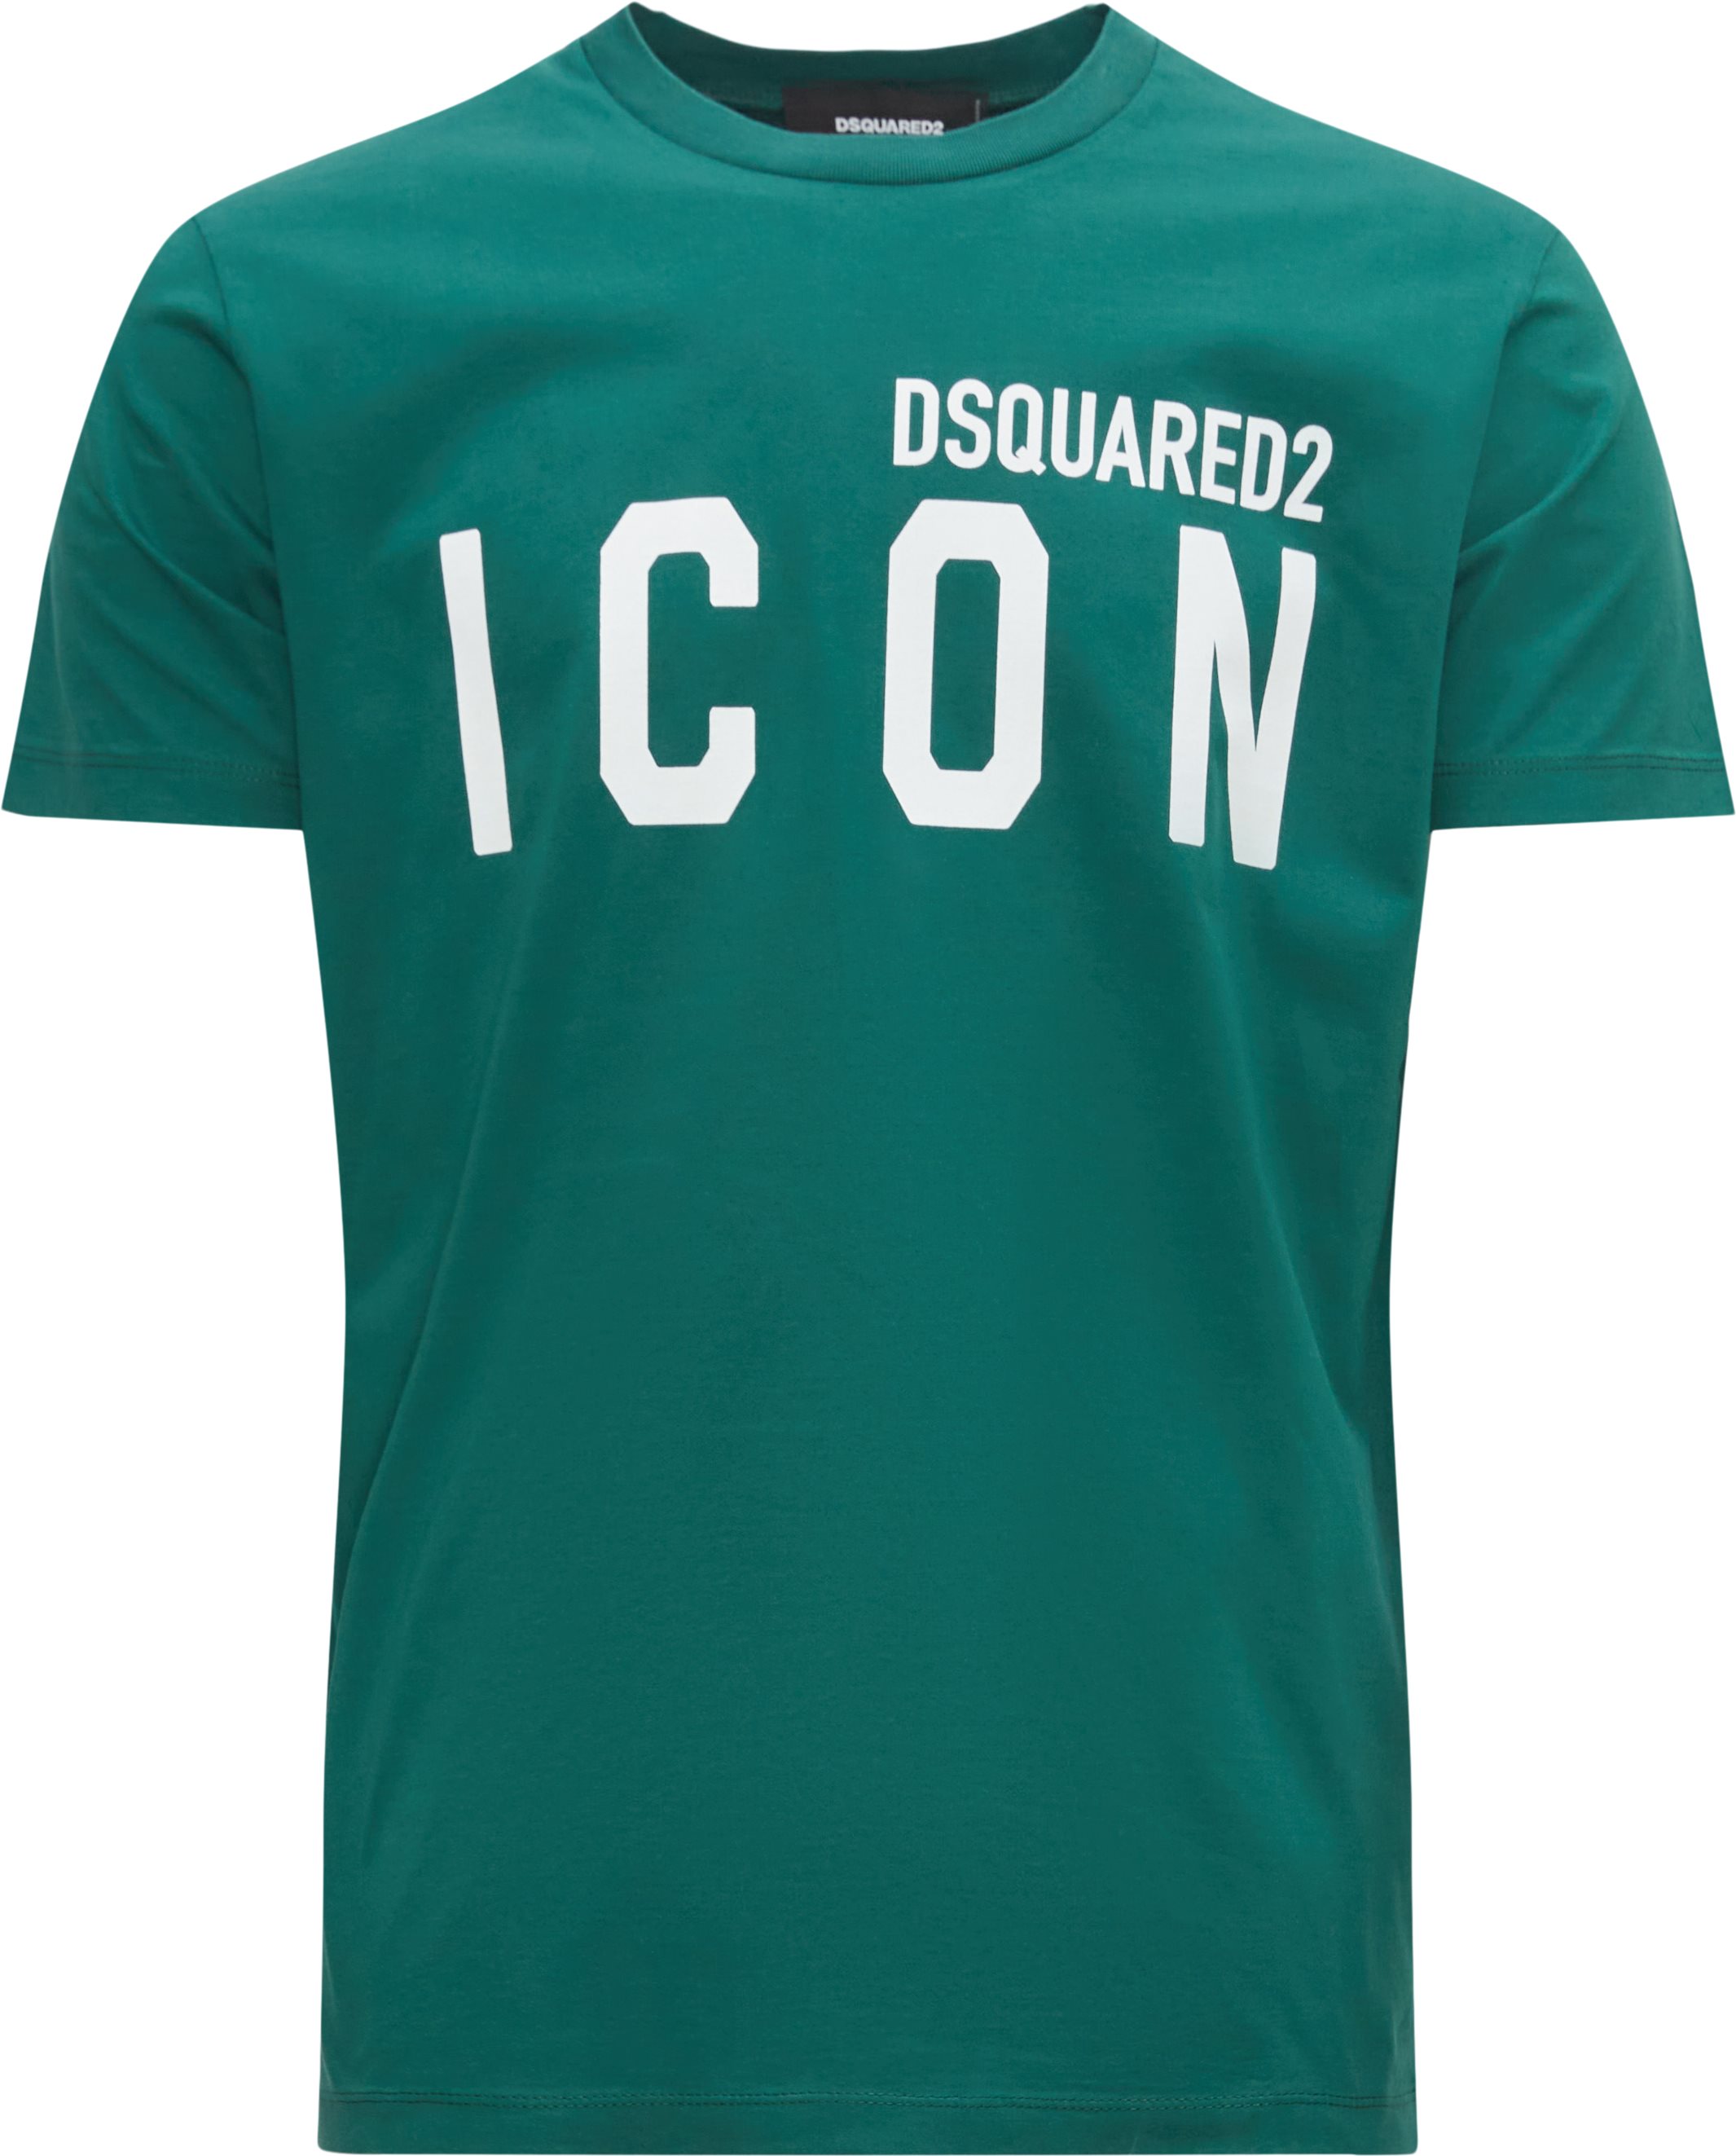 Dsquared2 T-shirts S79GC0003 S23009 Green